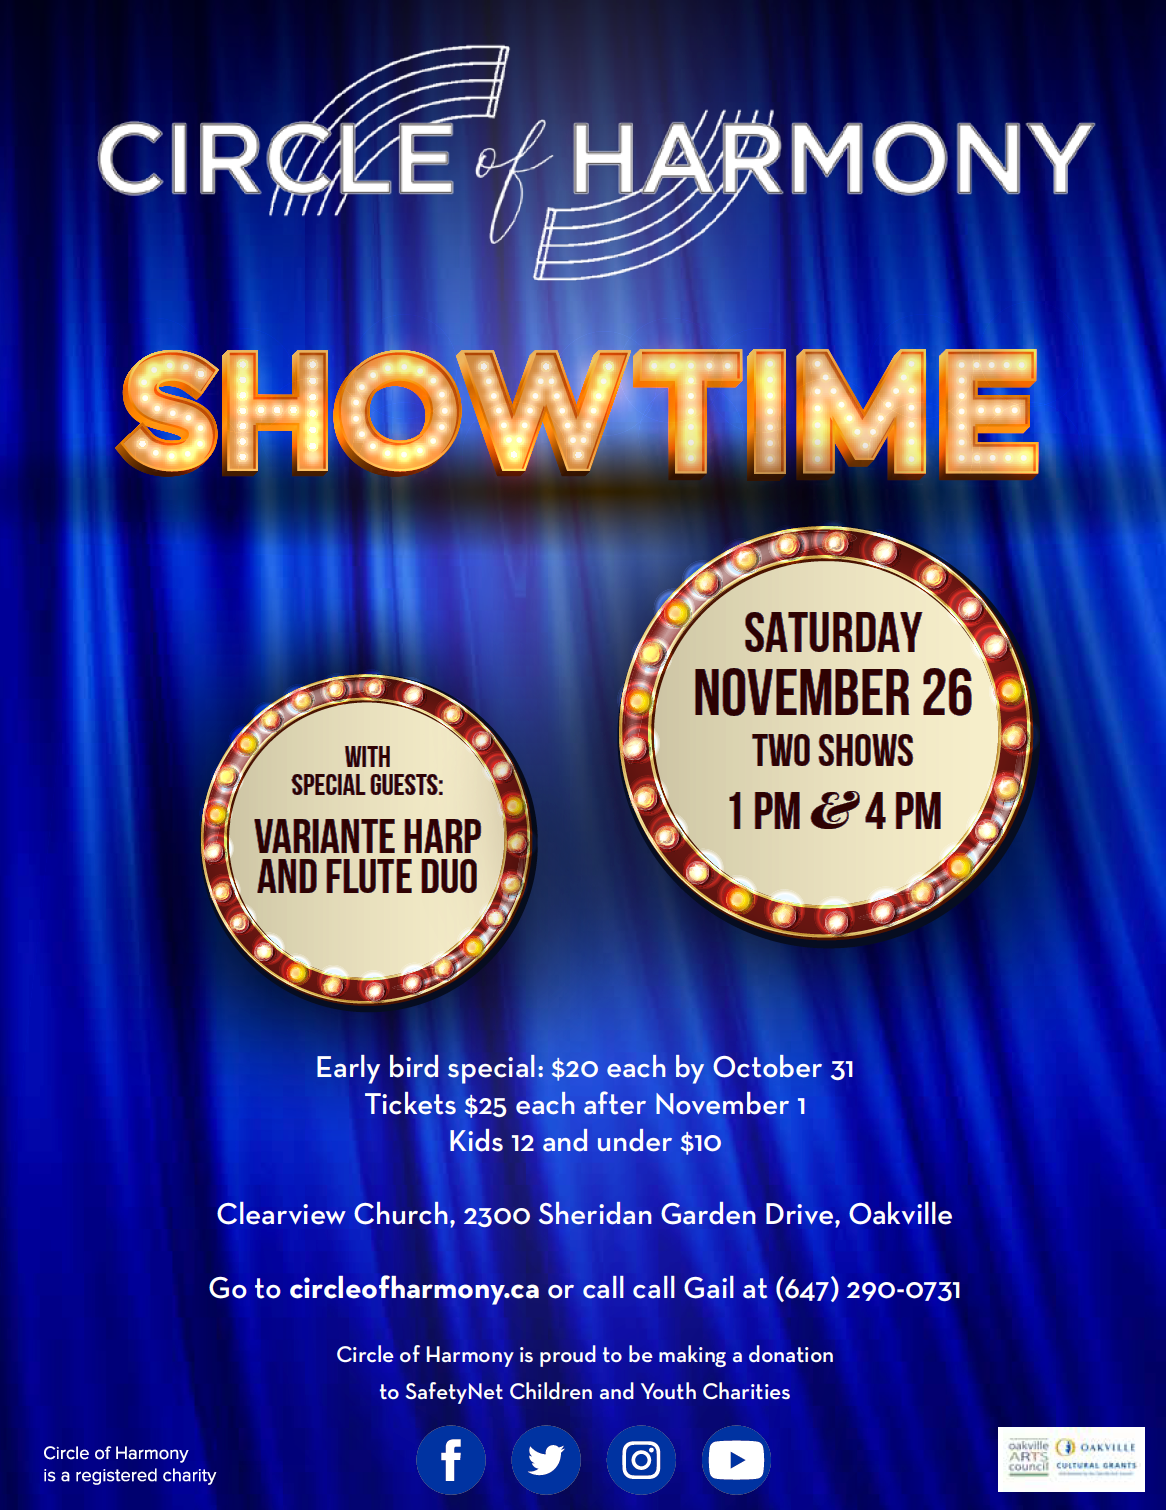 Circle of Harmony presents Showtime - 1 pm show